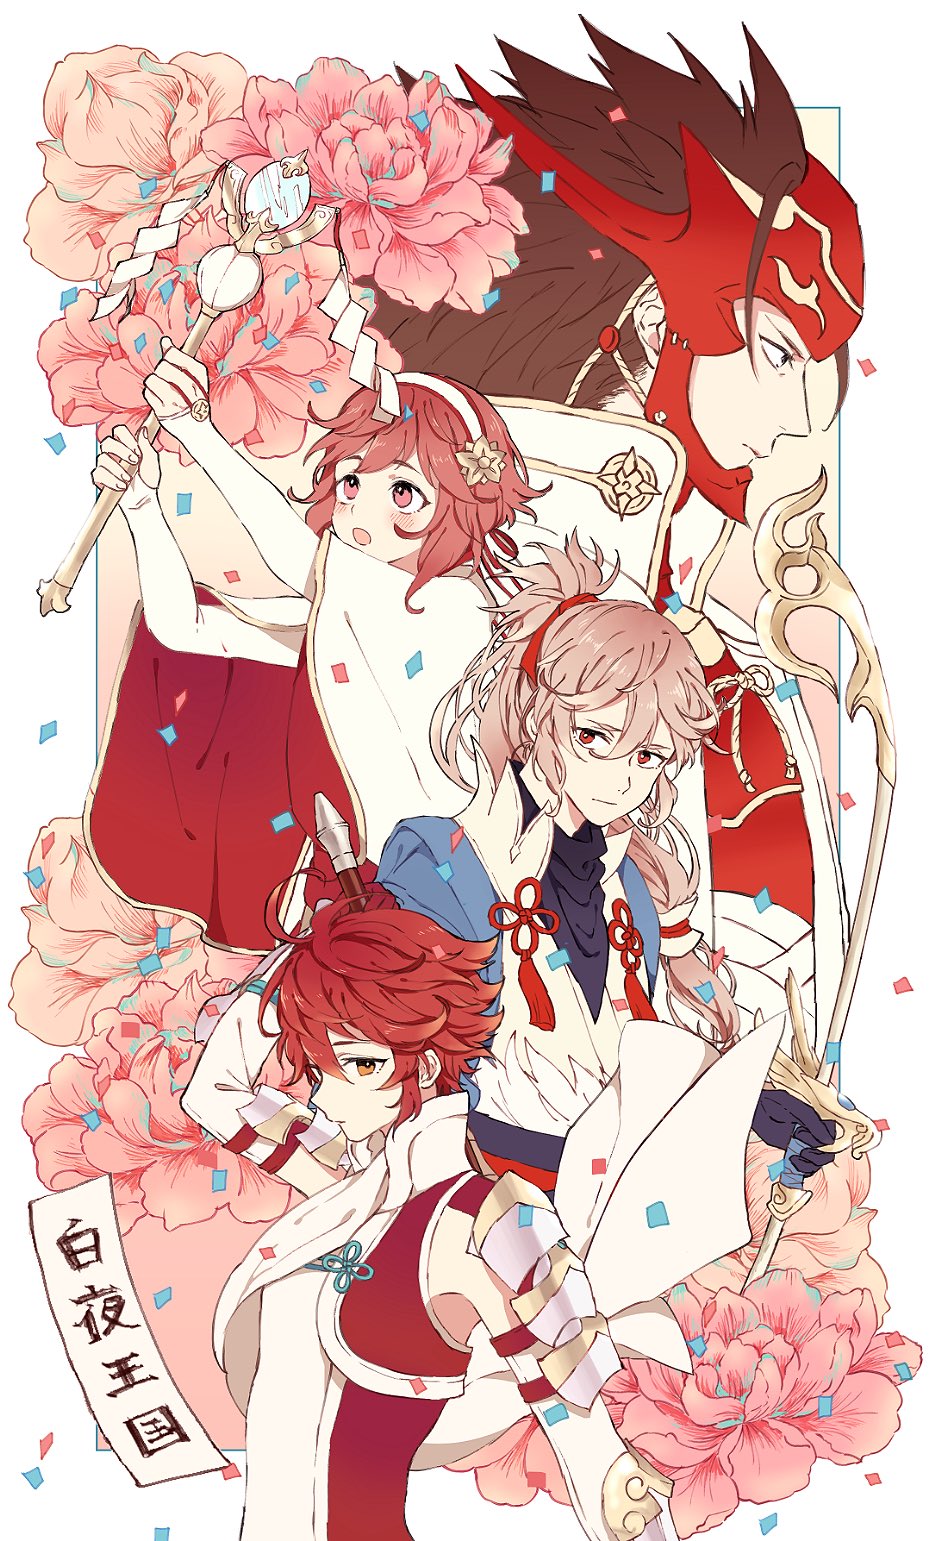 2boys 2girls aomeeso armor blush brother_and_sister brothers brown_eyes brown_hair family fire_emblem fire_emblem_if flower hairband high_ponytail highres hinoka_(fire_emblem_if) japanese_armor long_hair looking_up multiple_boys multiple_girls pink_hair red_eyes redhead ryouma_(fire_emblem_if) sakura_(fire_emblem_if) short_hair siblings sisters staff takumi_(fire_emblem_if) turtleneck upper_body